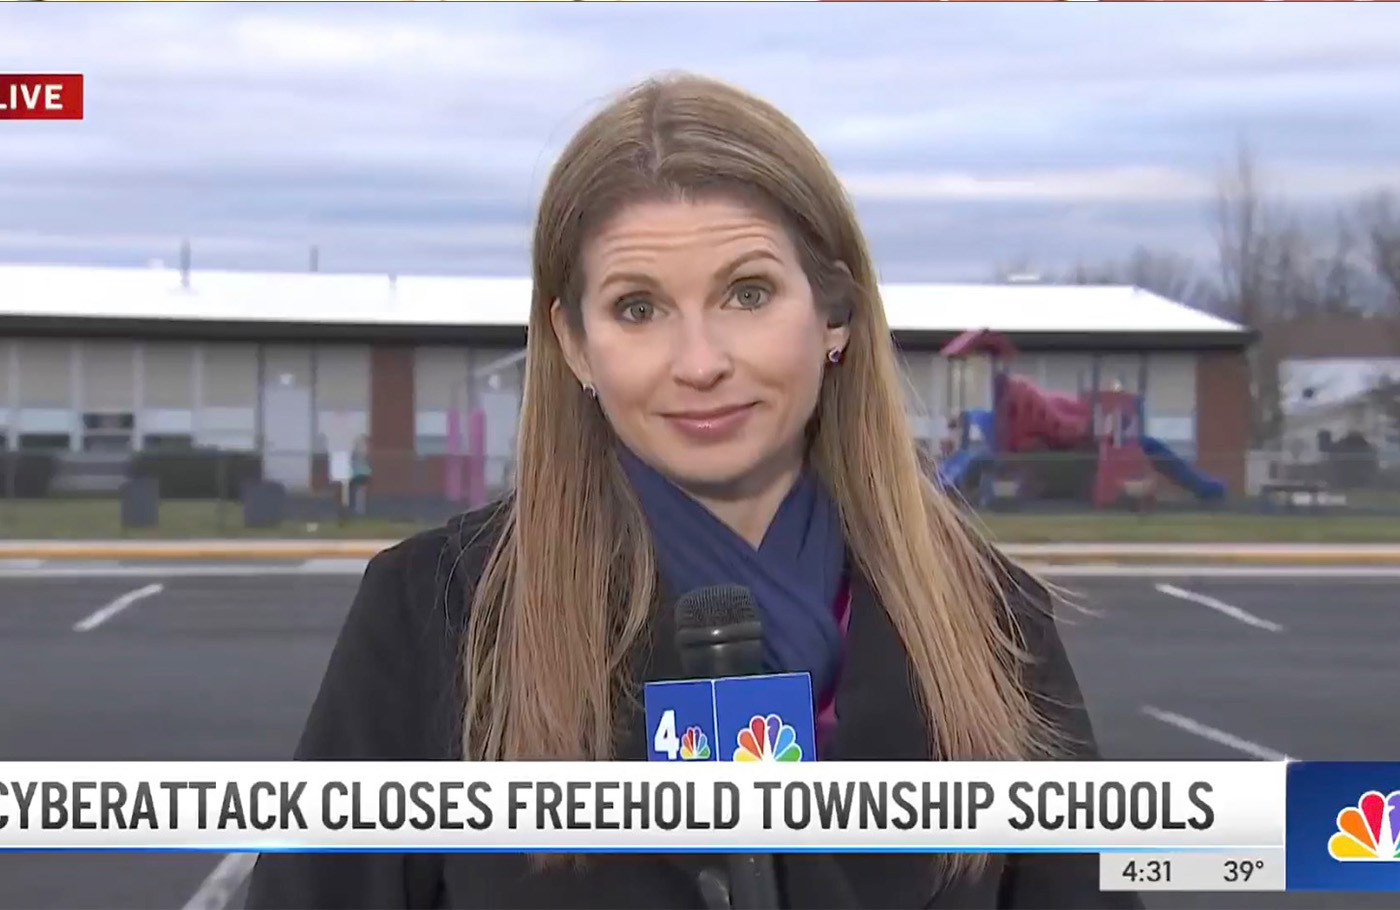 Cyberattack closes Freehold Township schools